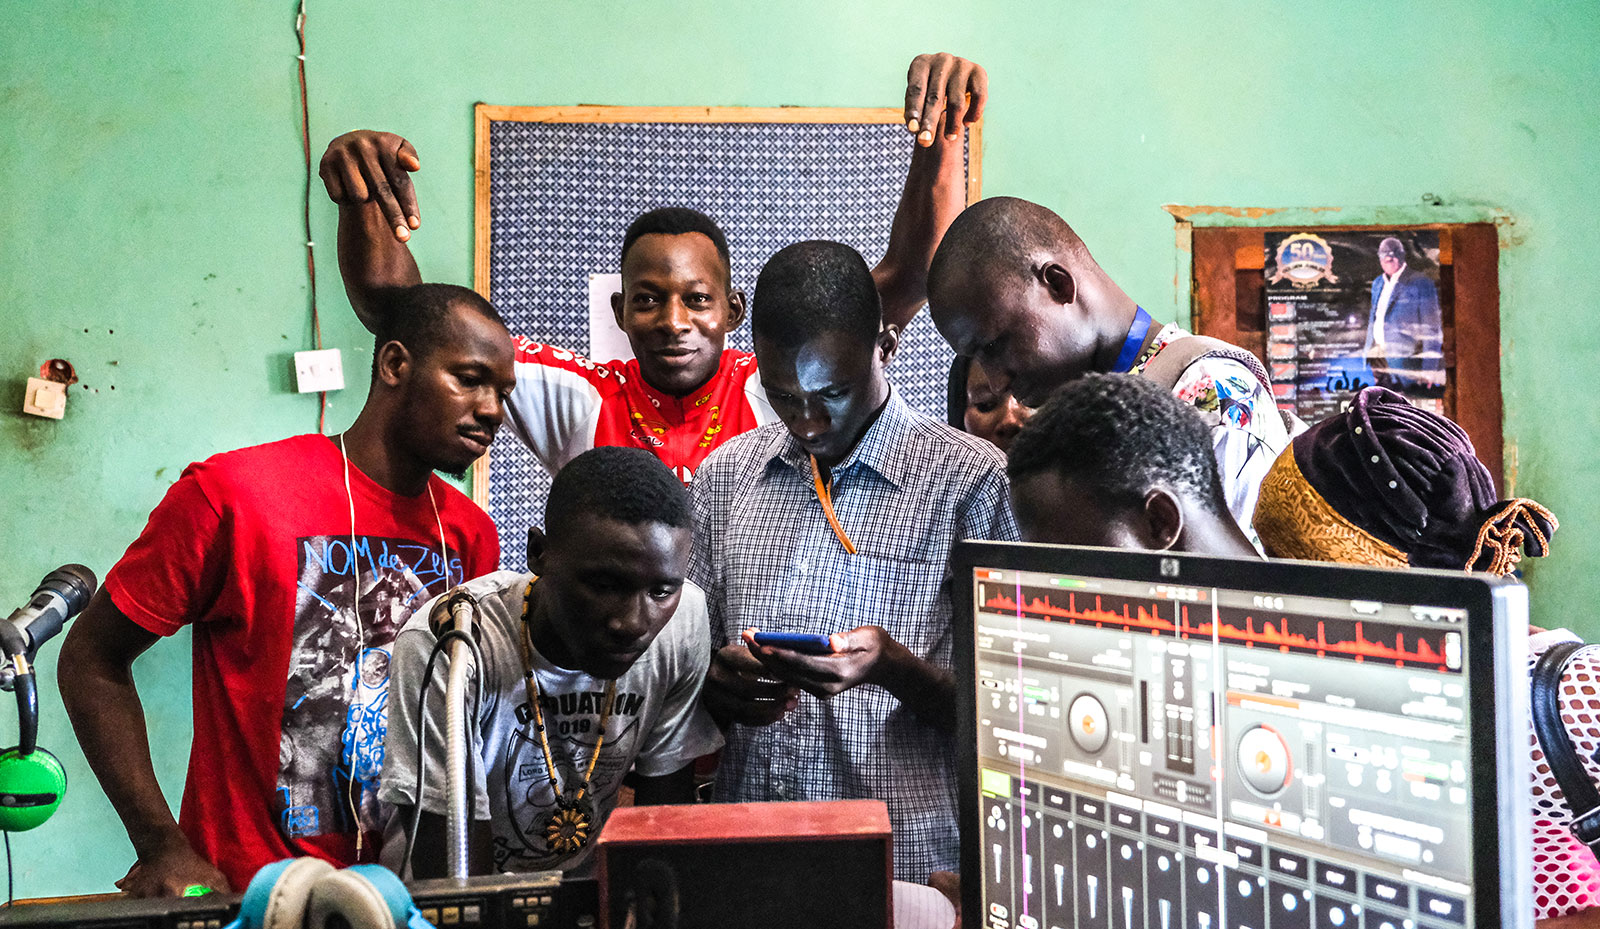 On Air: Radio Advertising the Youth Take Over in Basse in the four local Languages